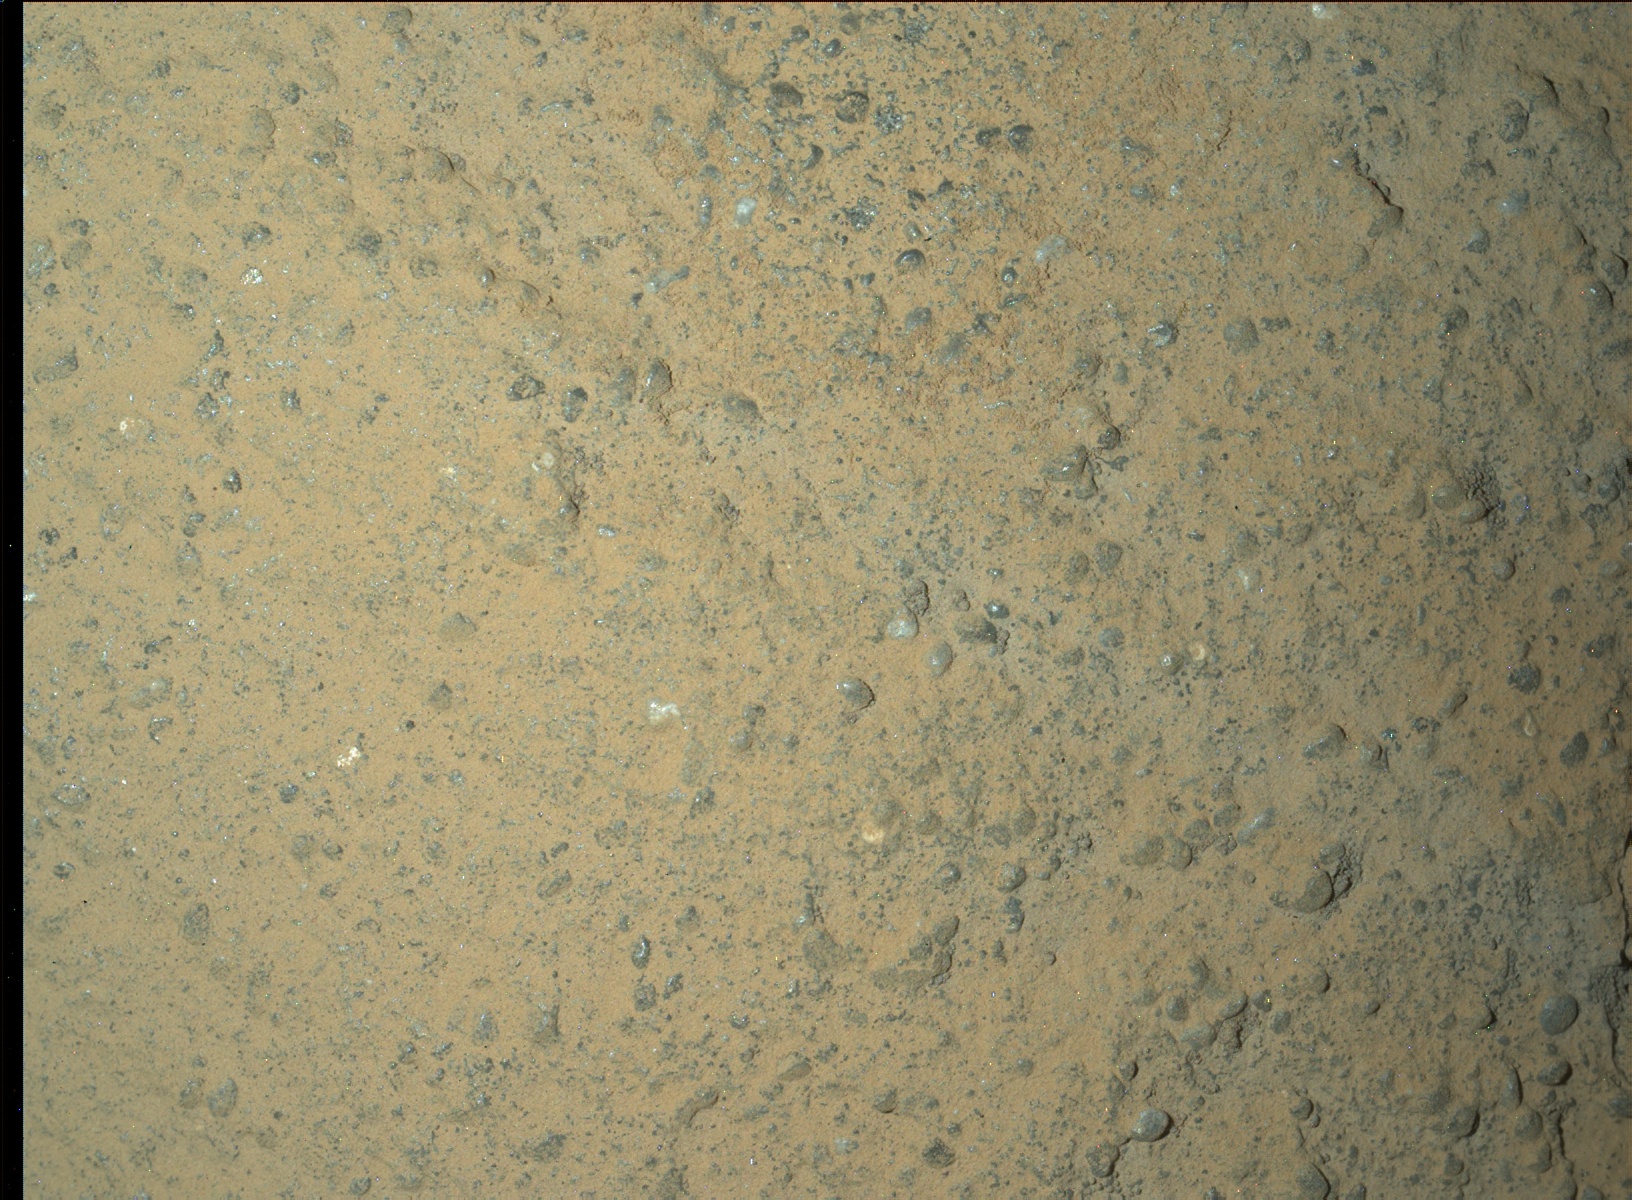 Nasa's Mars rover Curiosity acquired this image using its Mars Hand Lens Imager (MAHLI) on Sol 1337